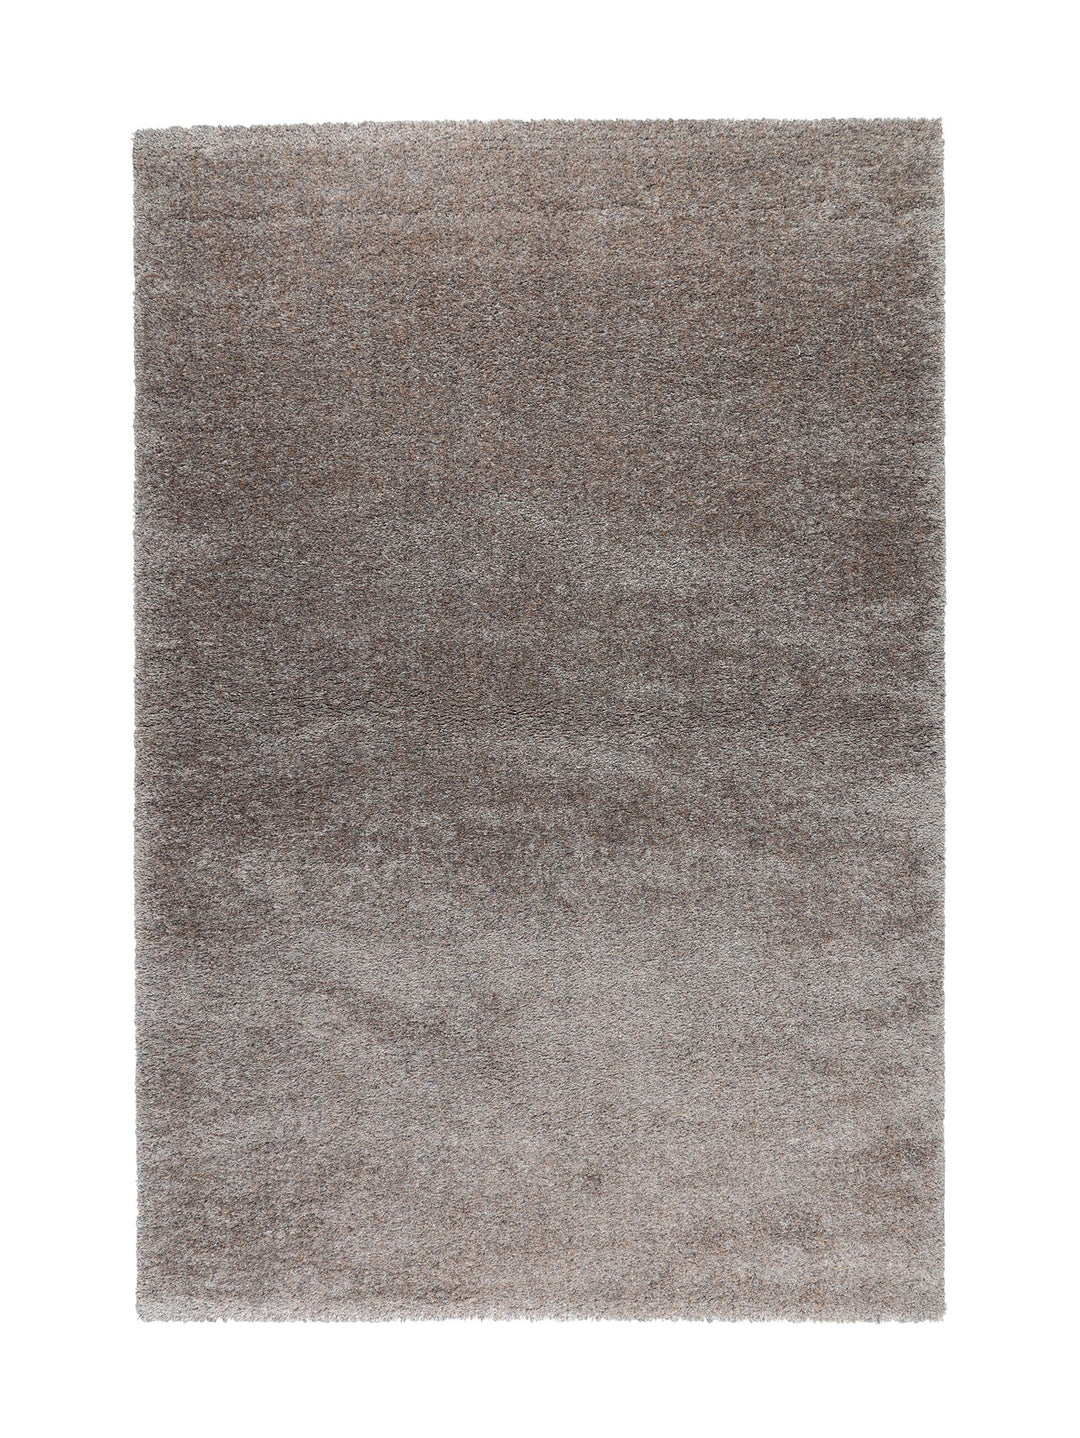 Reflection Rug in Storm - rug- Hertex Haus Online - Extra Large